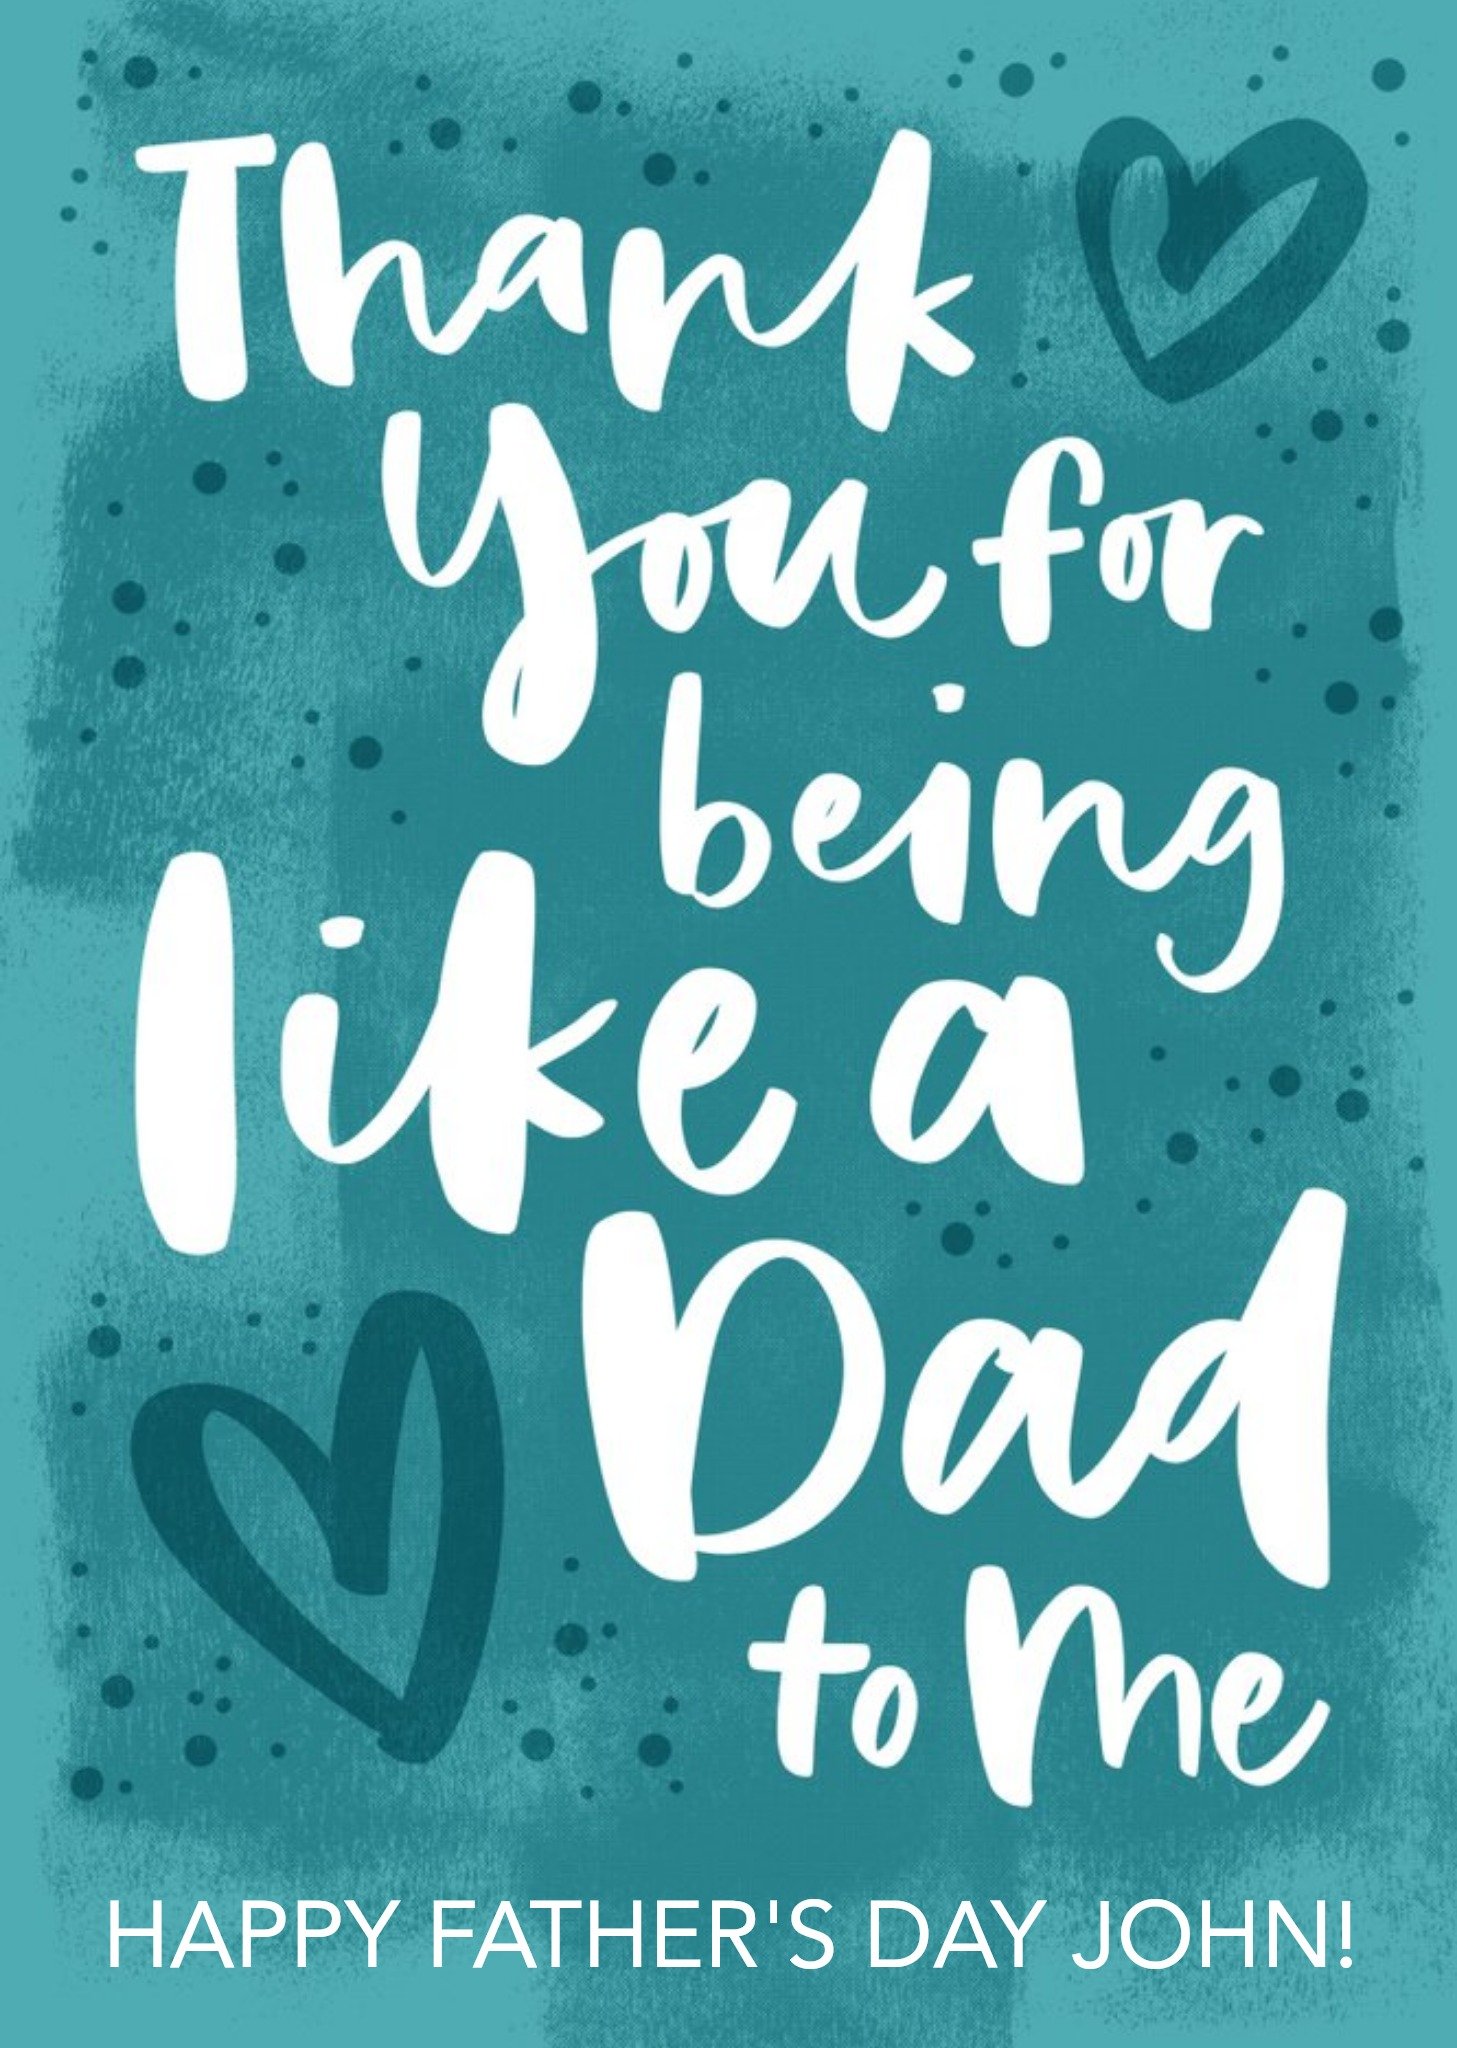 Moonpig Modern Typographic Thank You For Being Like A Dad To Me Father's Day Card Ecard